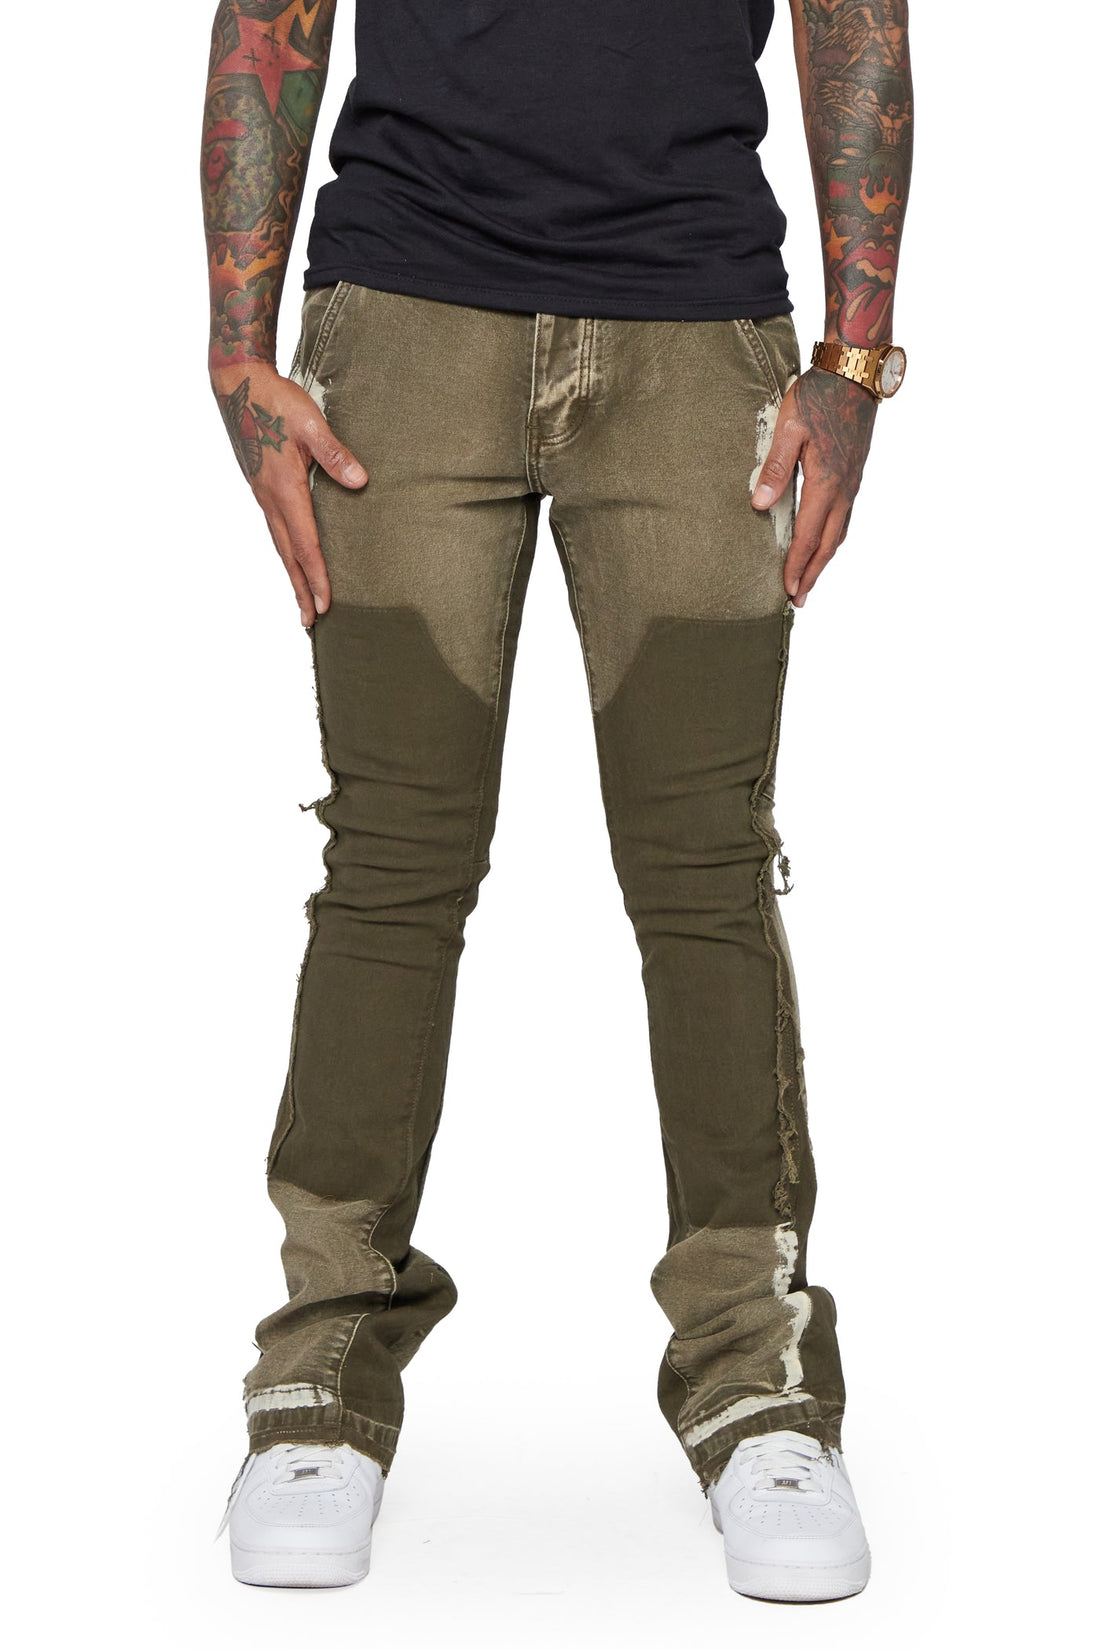 VALABASAS STACKED "ALPHA" OLIVE Jeans